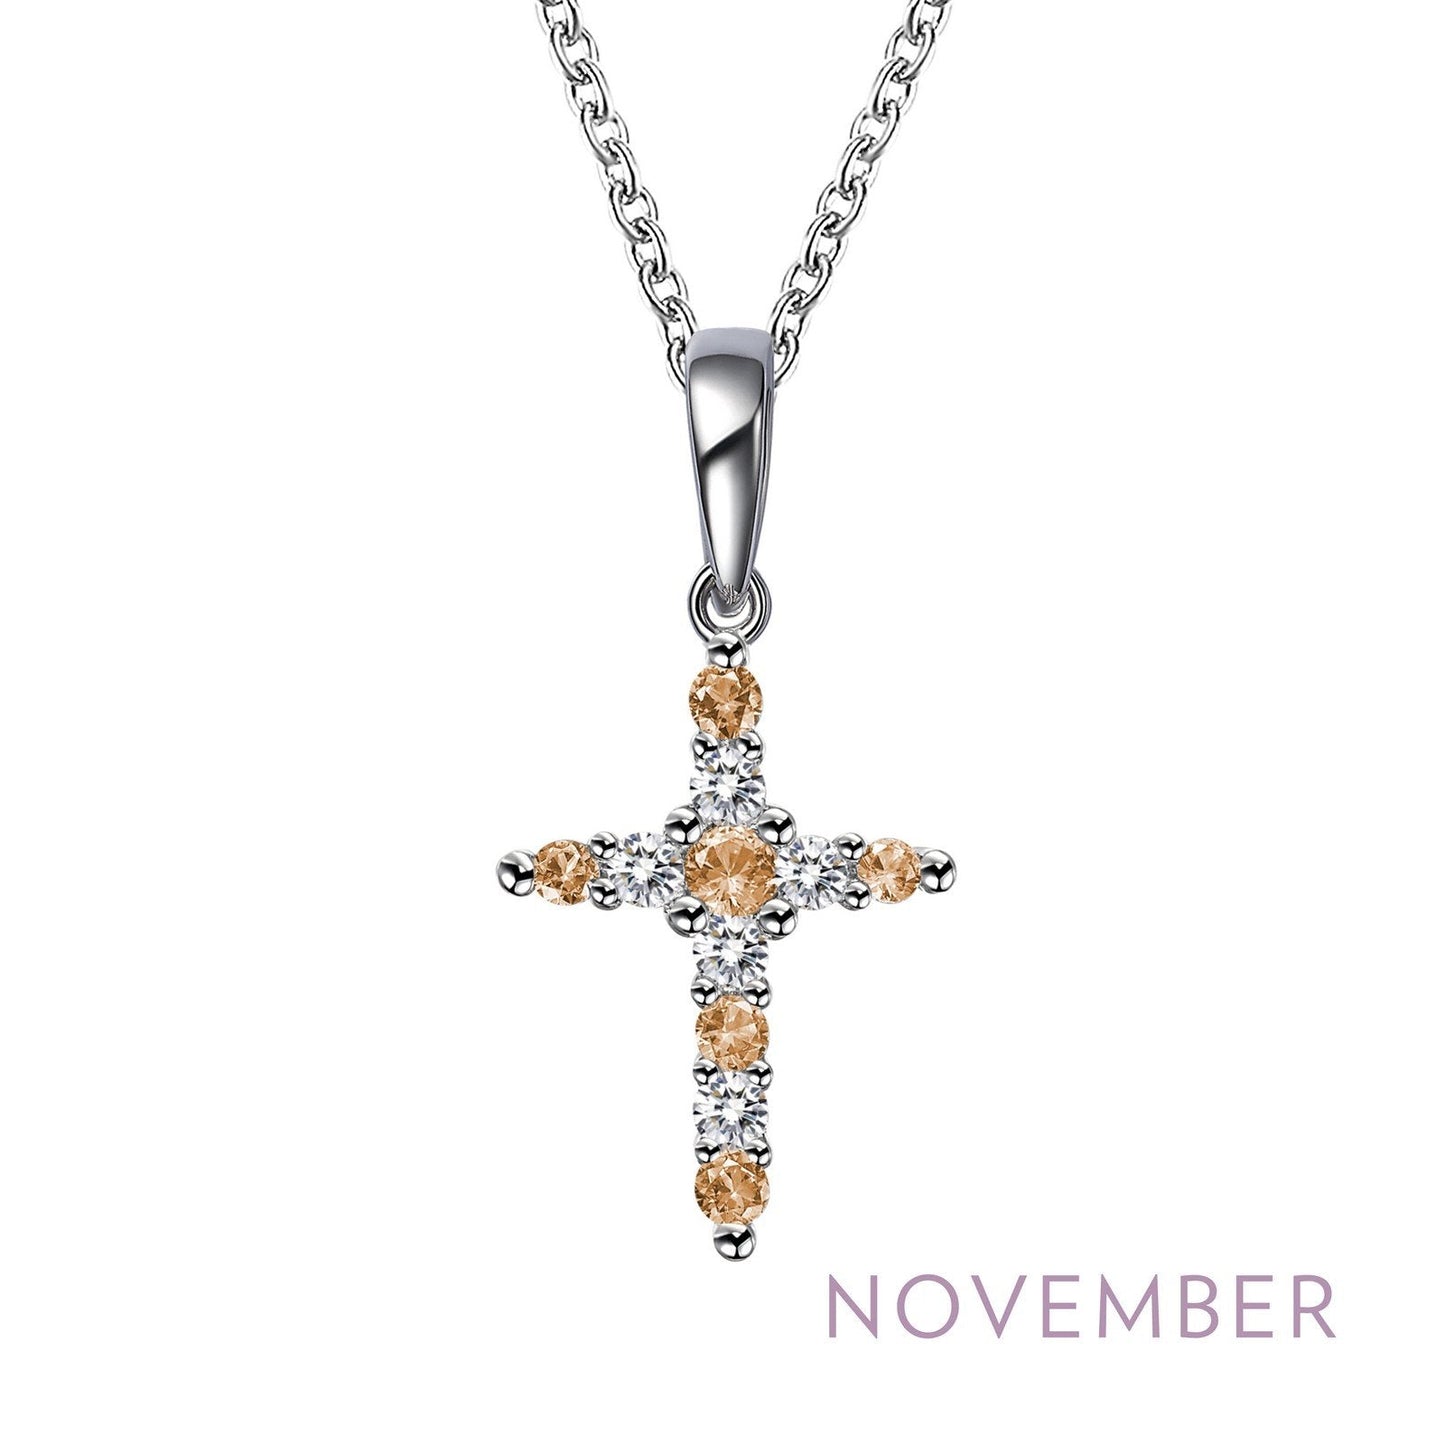 Load image into Gallery viewer, Lafonn November Birthstone Necklace NOVEMBER NECKLACES Platinum 0.33cts CTS Approx. 25mm (H) x 12.5mm (W)
